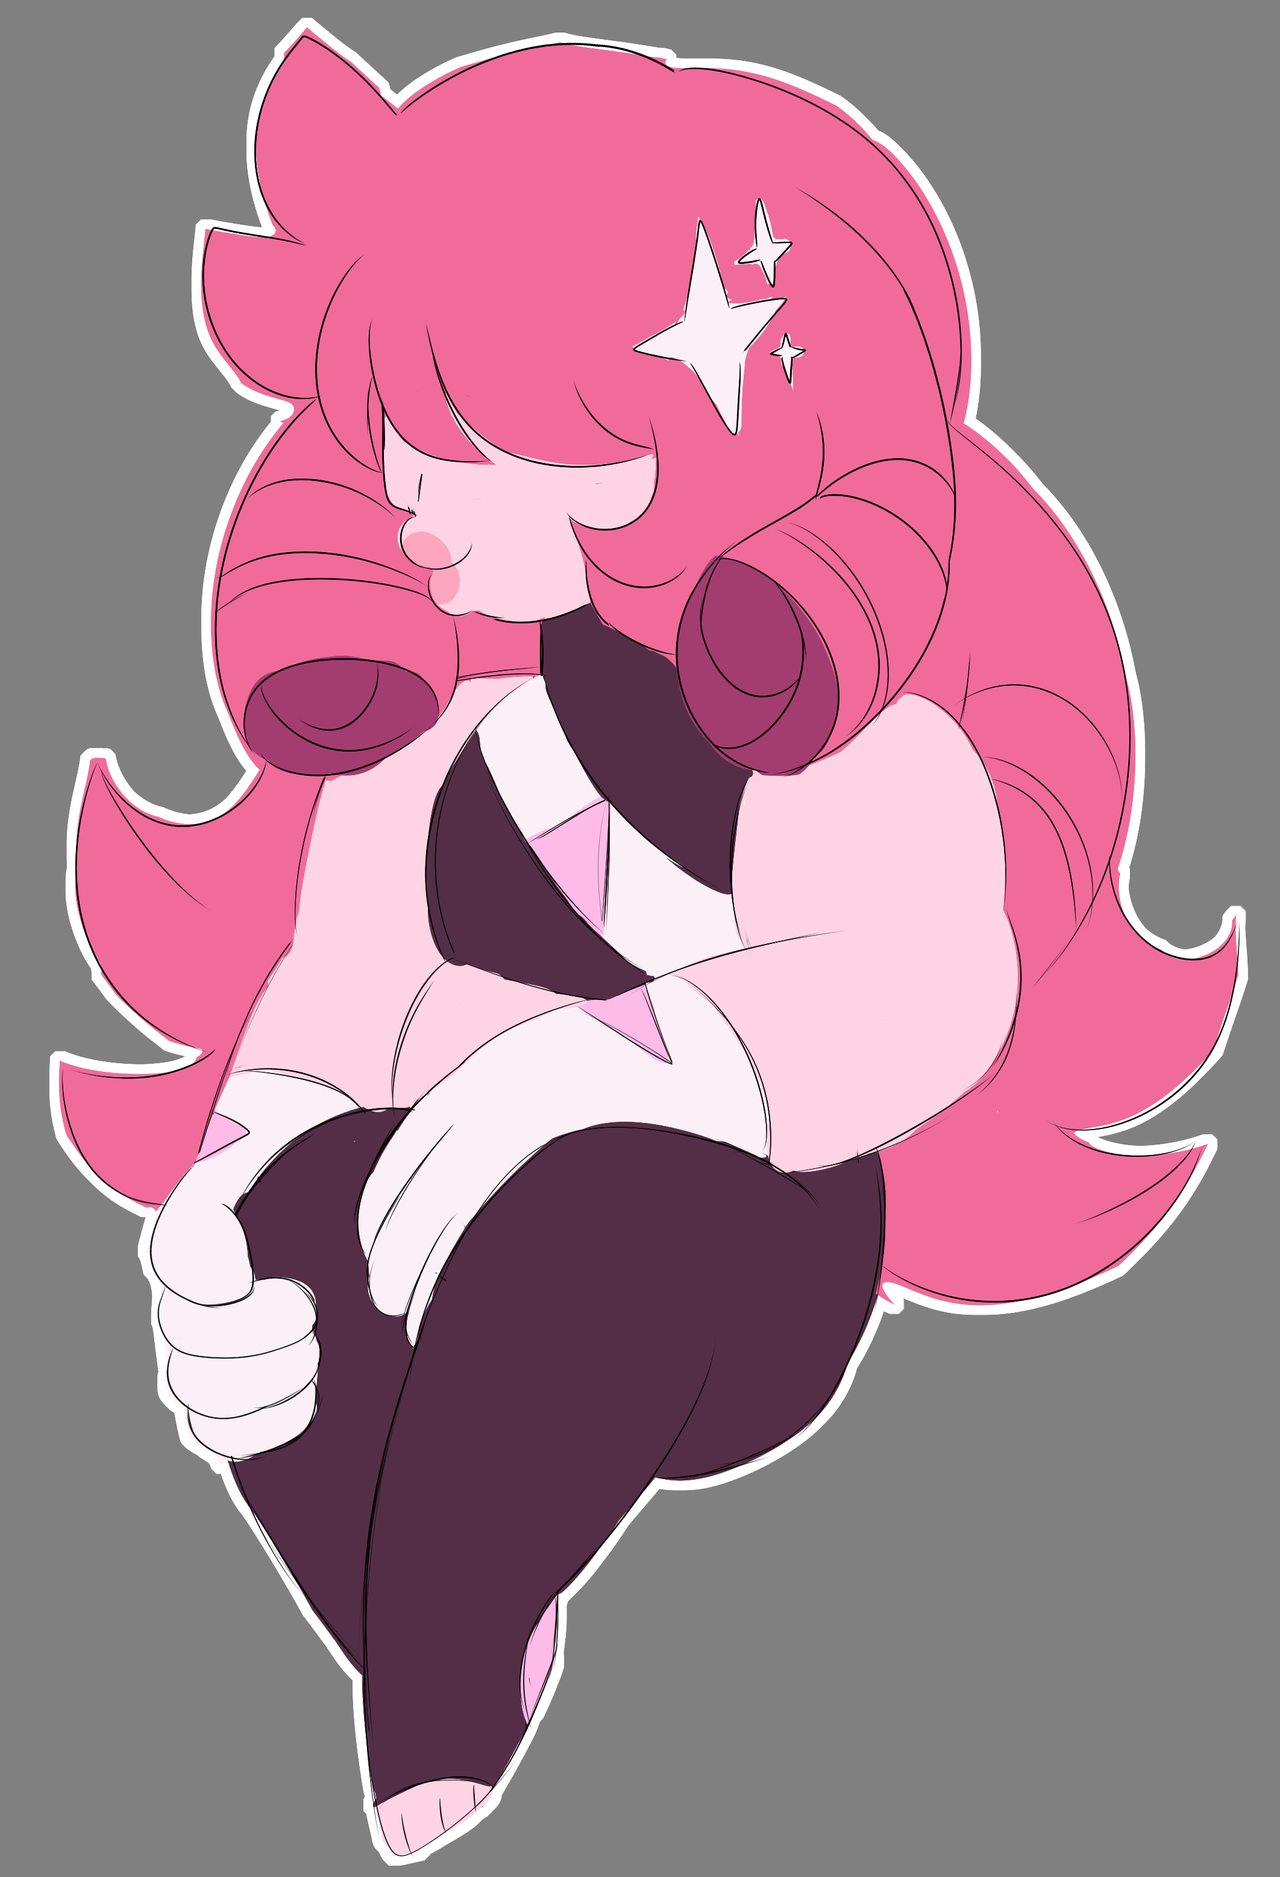 Star Rose Quartz (she/her) a calm, gentle warrior who honestly dislikes fighting and ran away from Homeworld and the War as soon as she could